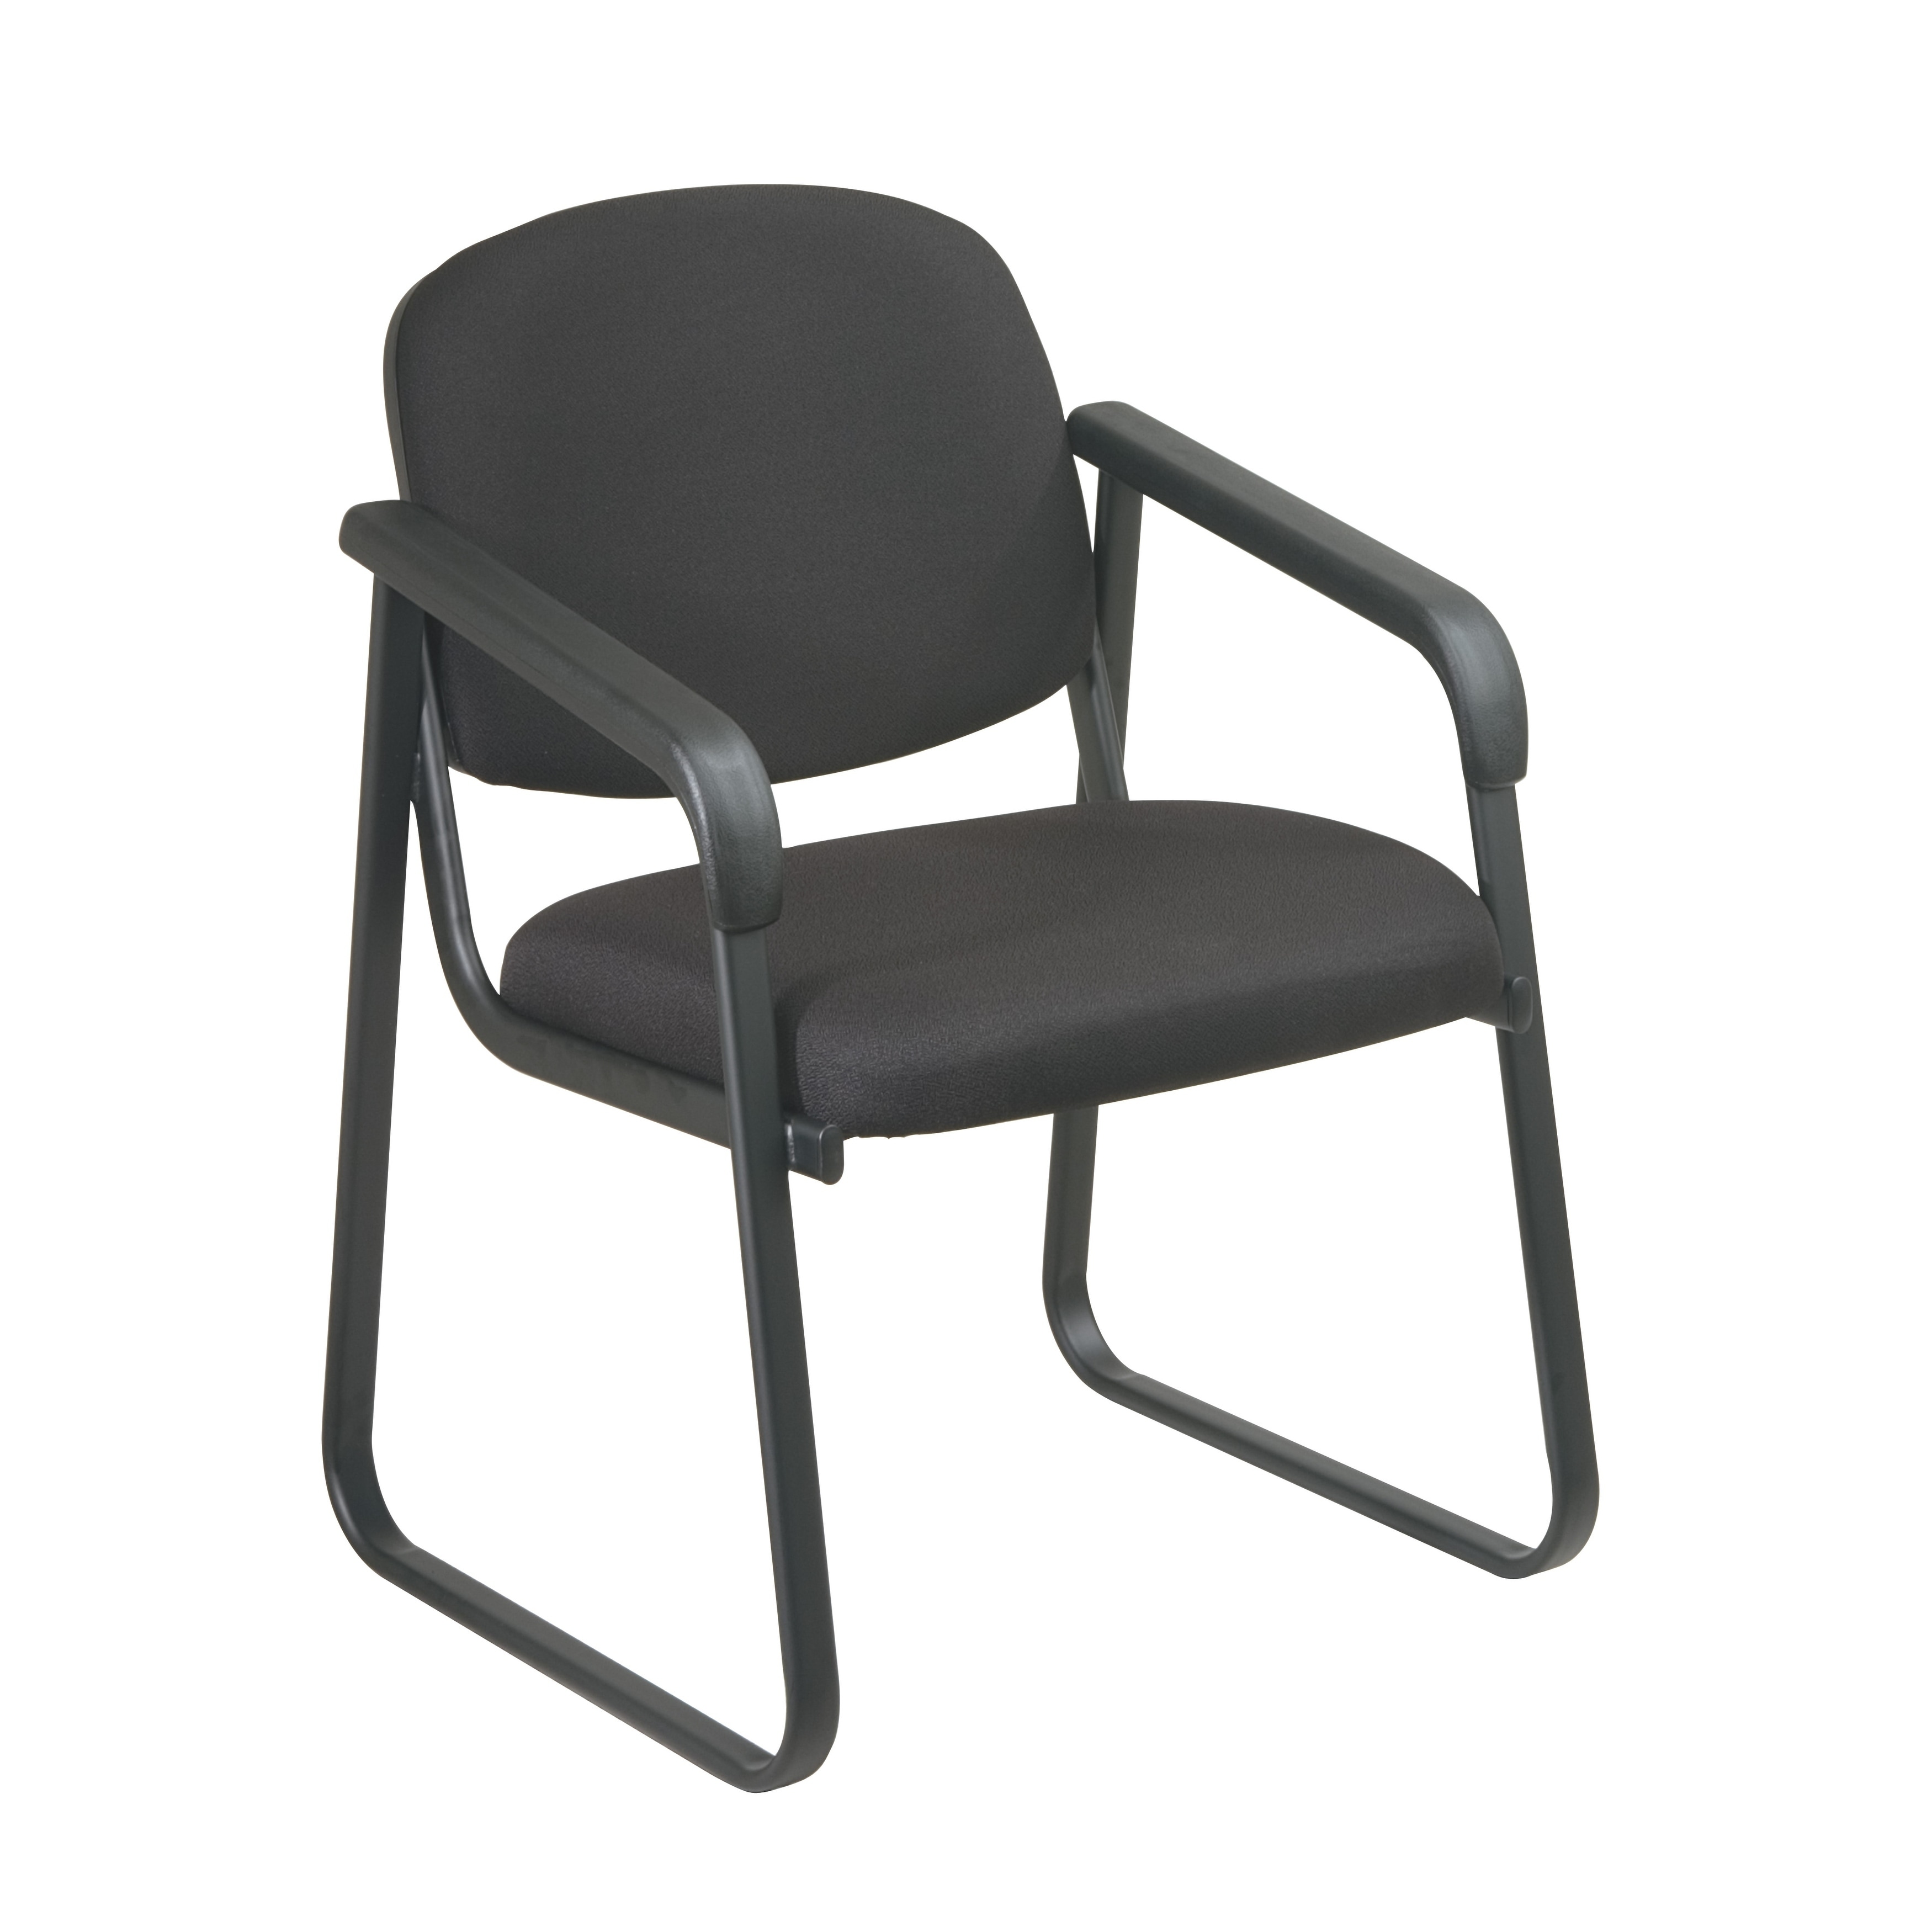 Doctors Office Fabric Upholstered Waiting Room Chair For Business Lobbies Black Fabric No Arms Office Factor Stackable Guest Chair Extra Seating Office Products Chairs Sofas Rapidinfrastrukturcom